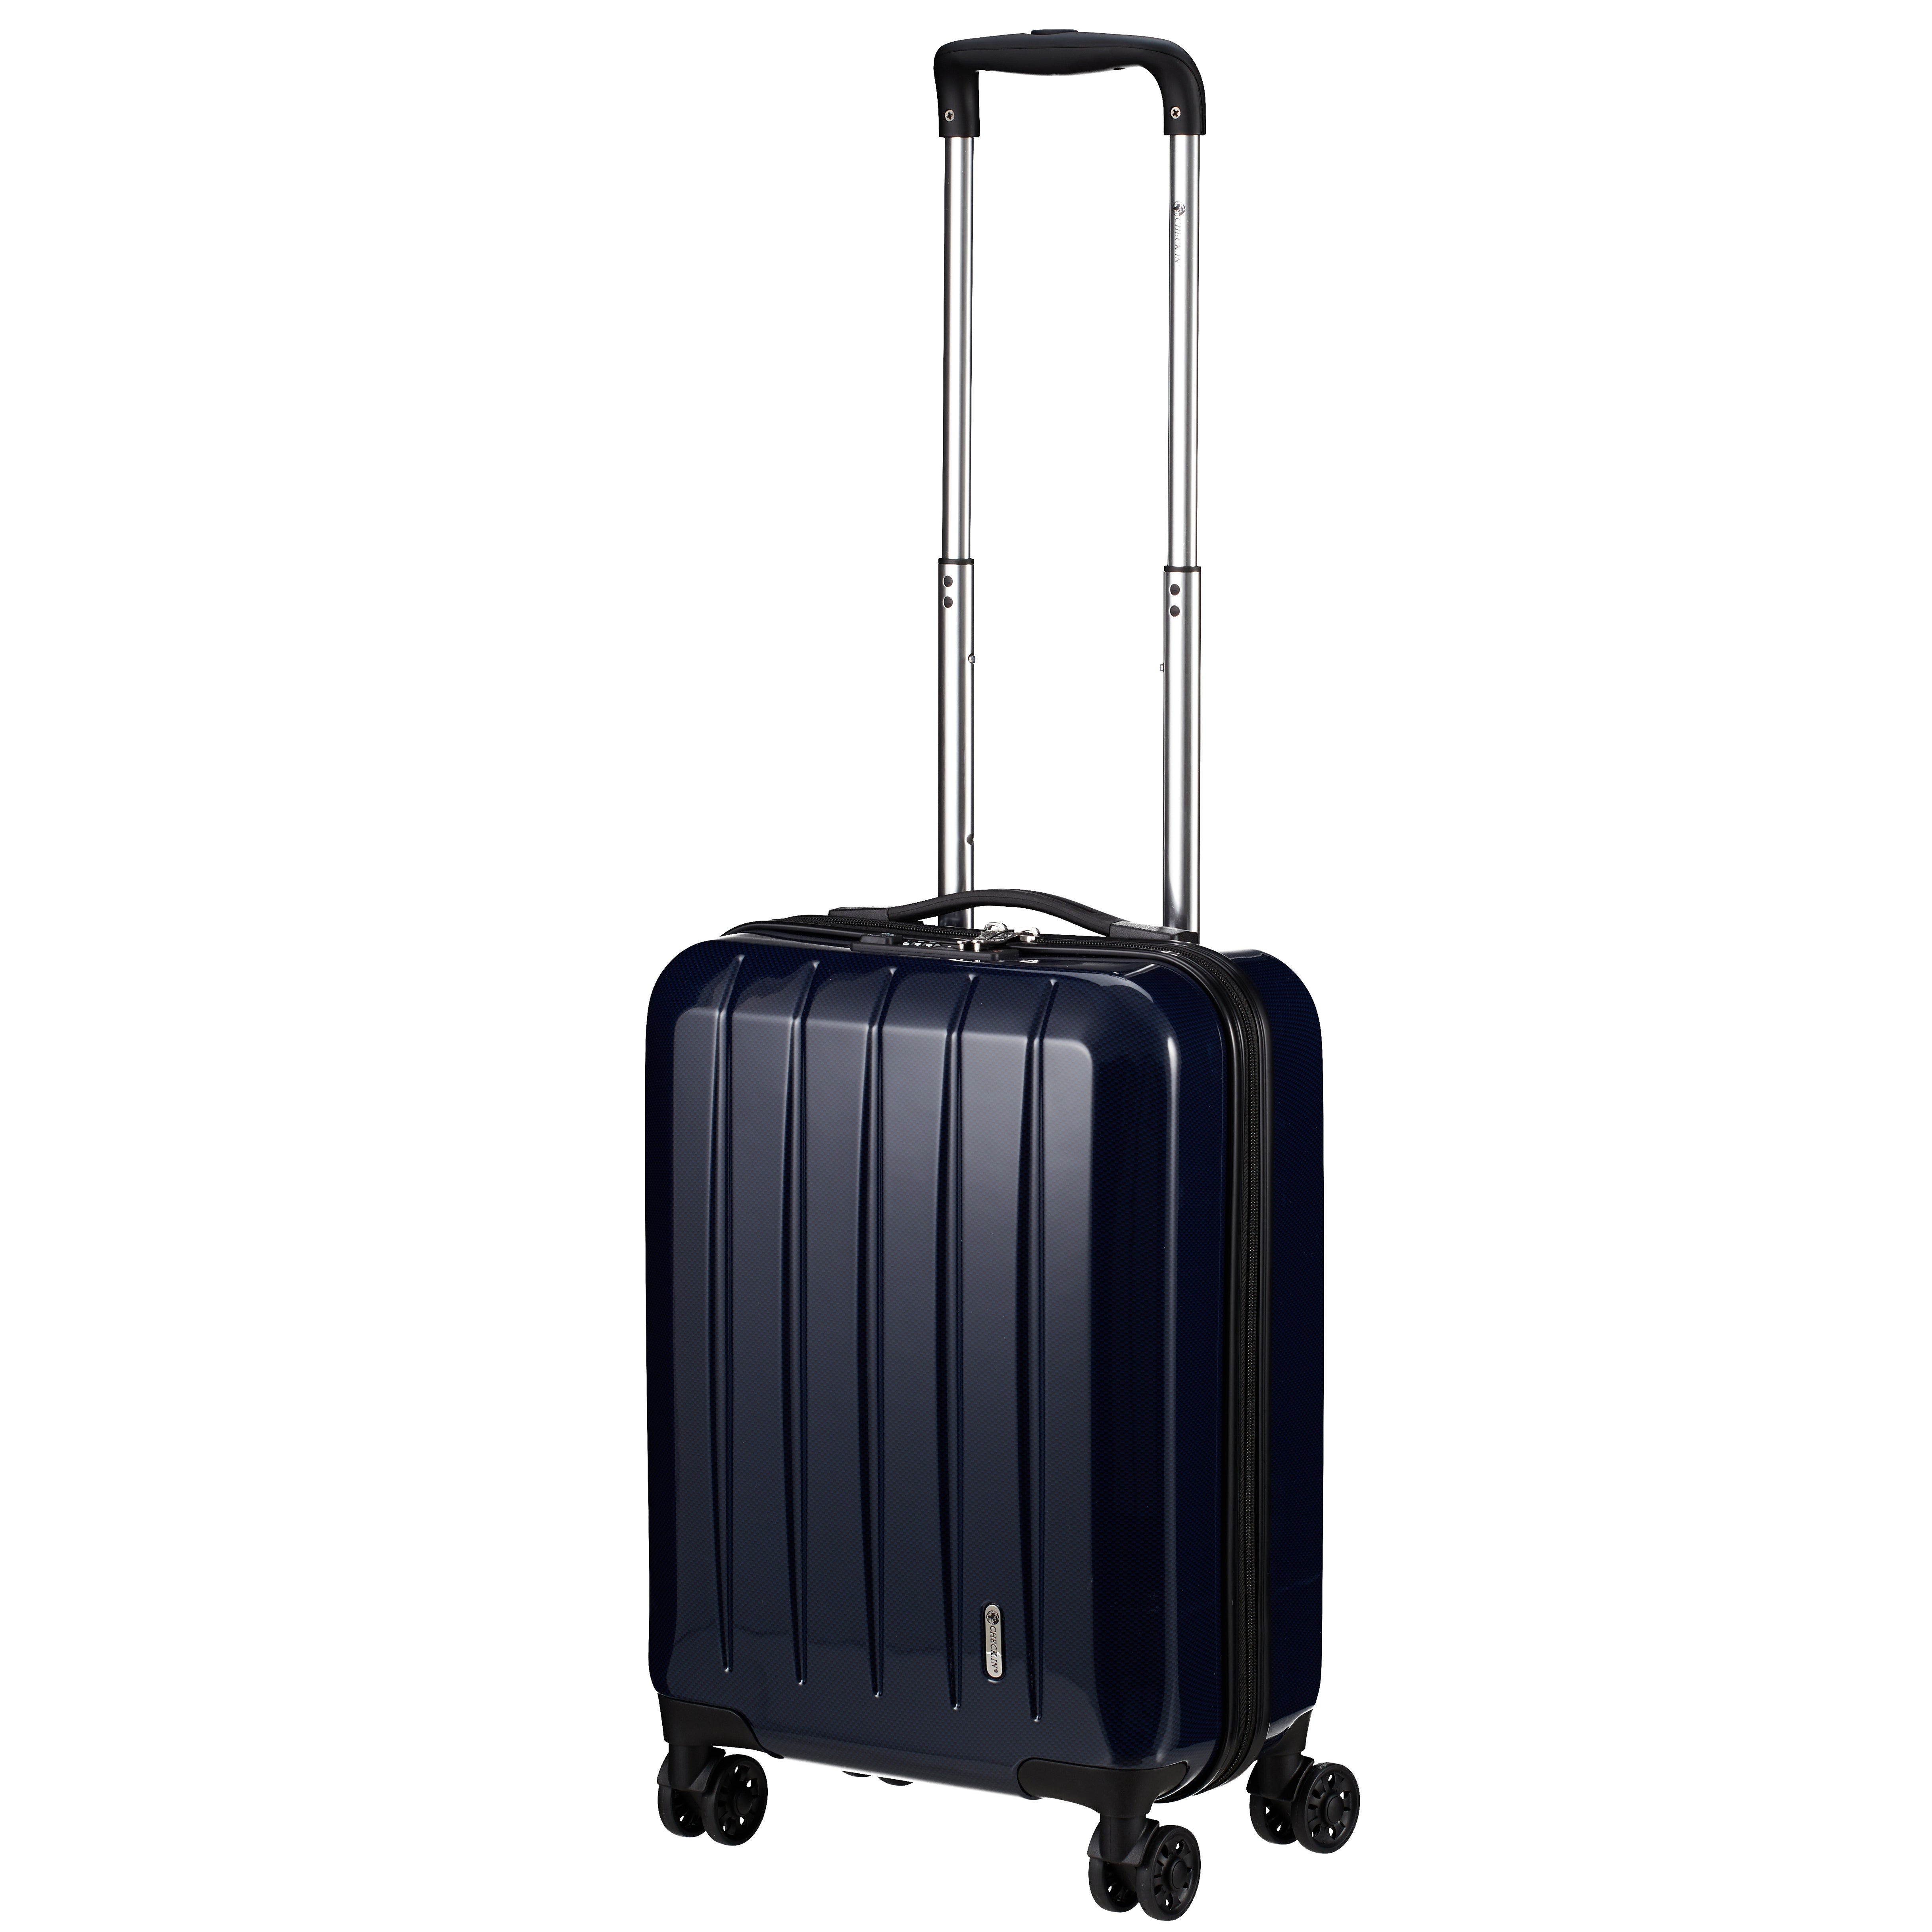 Check In London 2.0 Valise cabine 4 roues 50 cm - Bleu